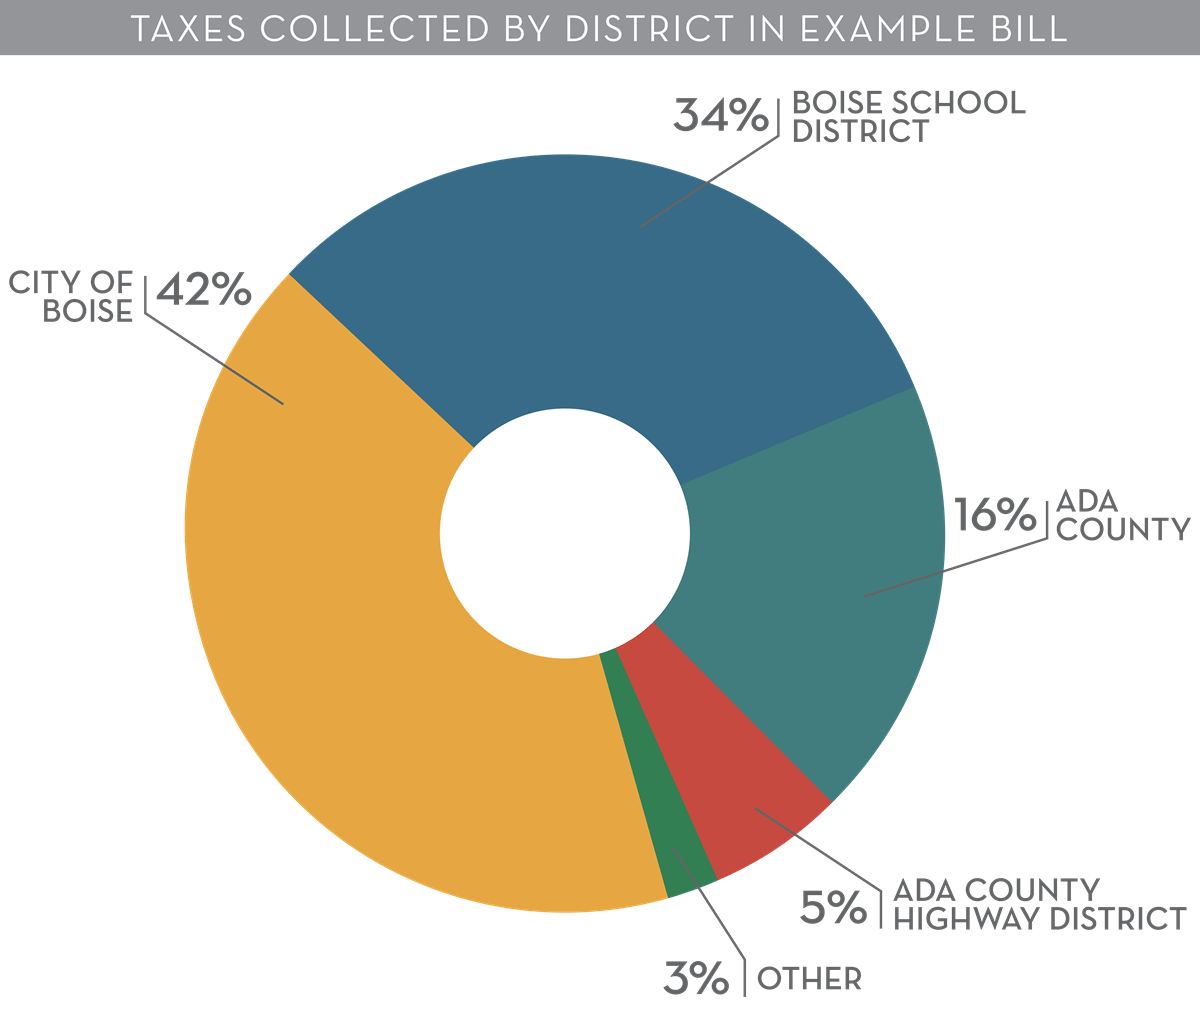 Taxes collected by district from example bill.  